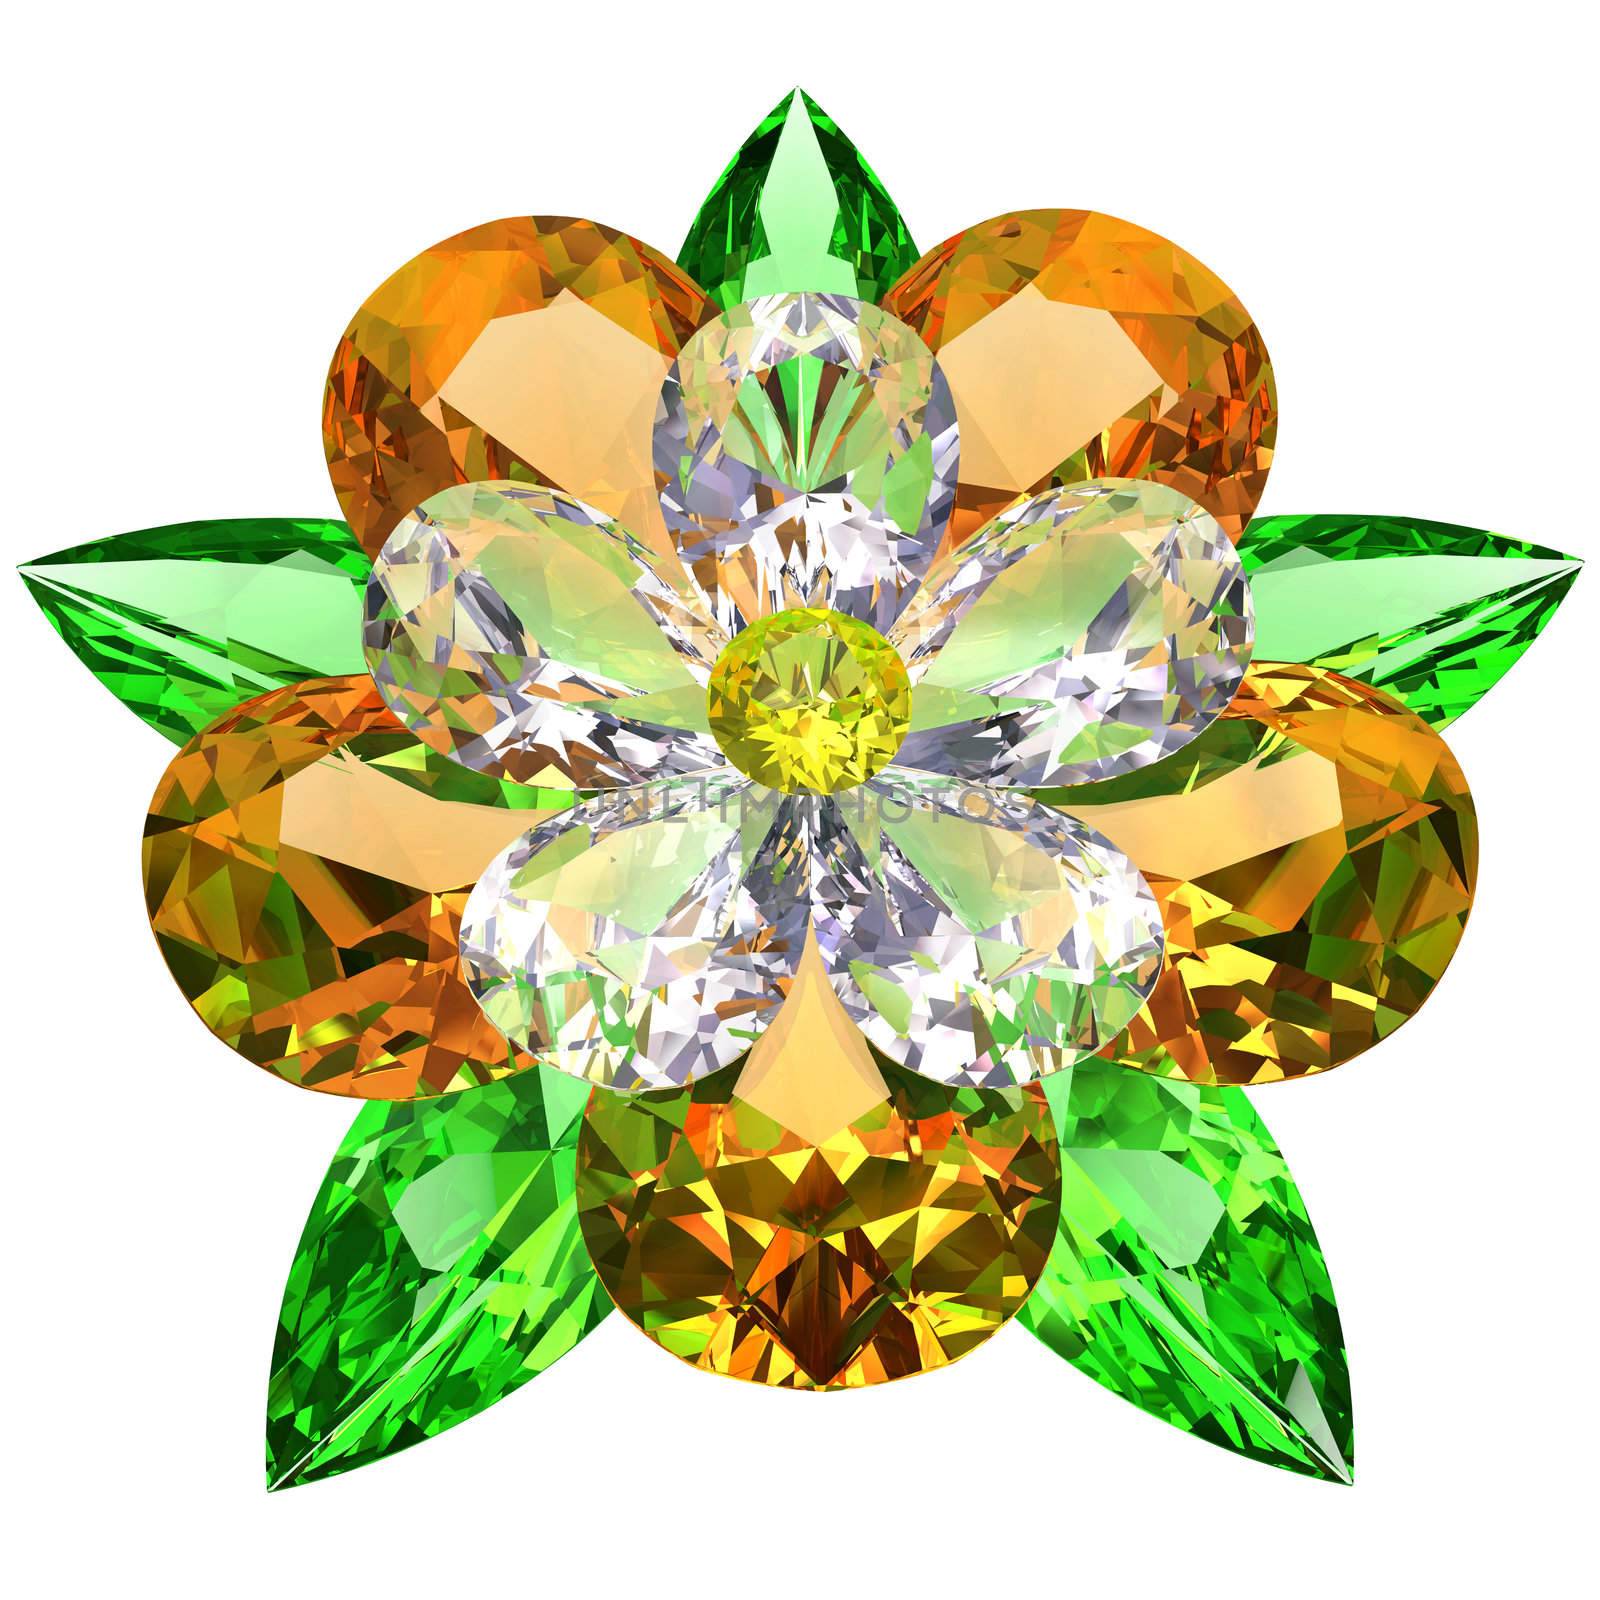 Flower composed of colored gemstones on white by oneo